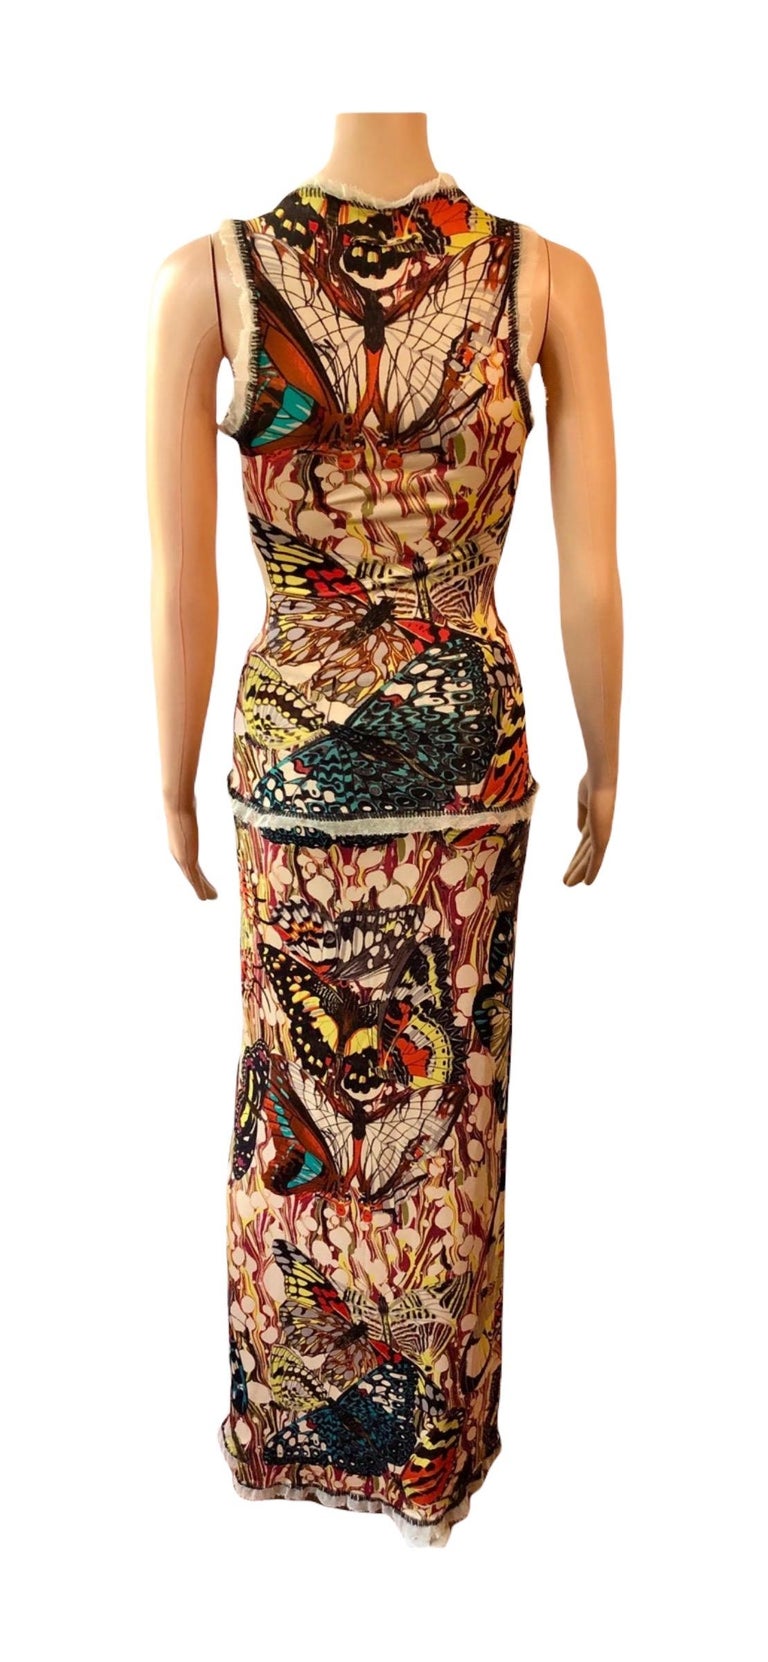 Jean Paul Gaultier S/S 2003 Butterfly Print Top and Skirt Ensemble 2 ...